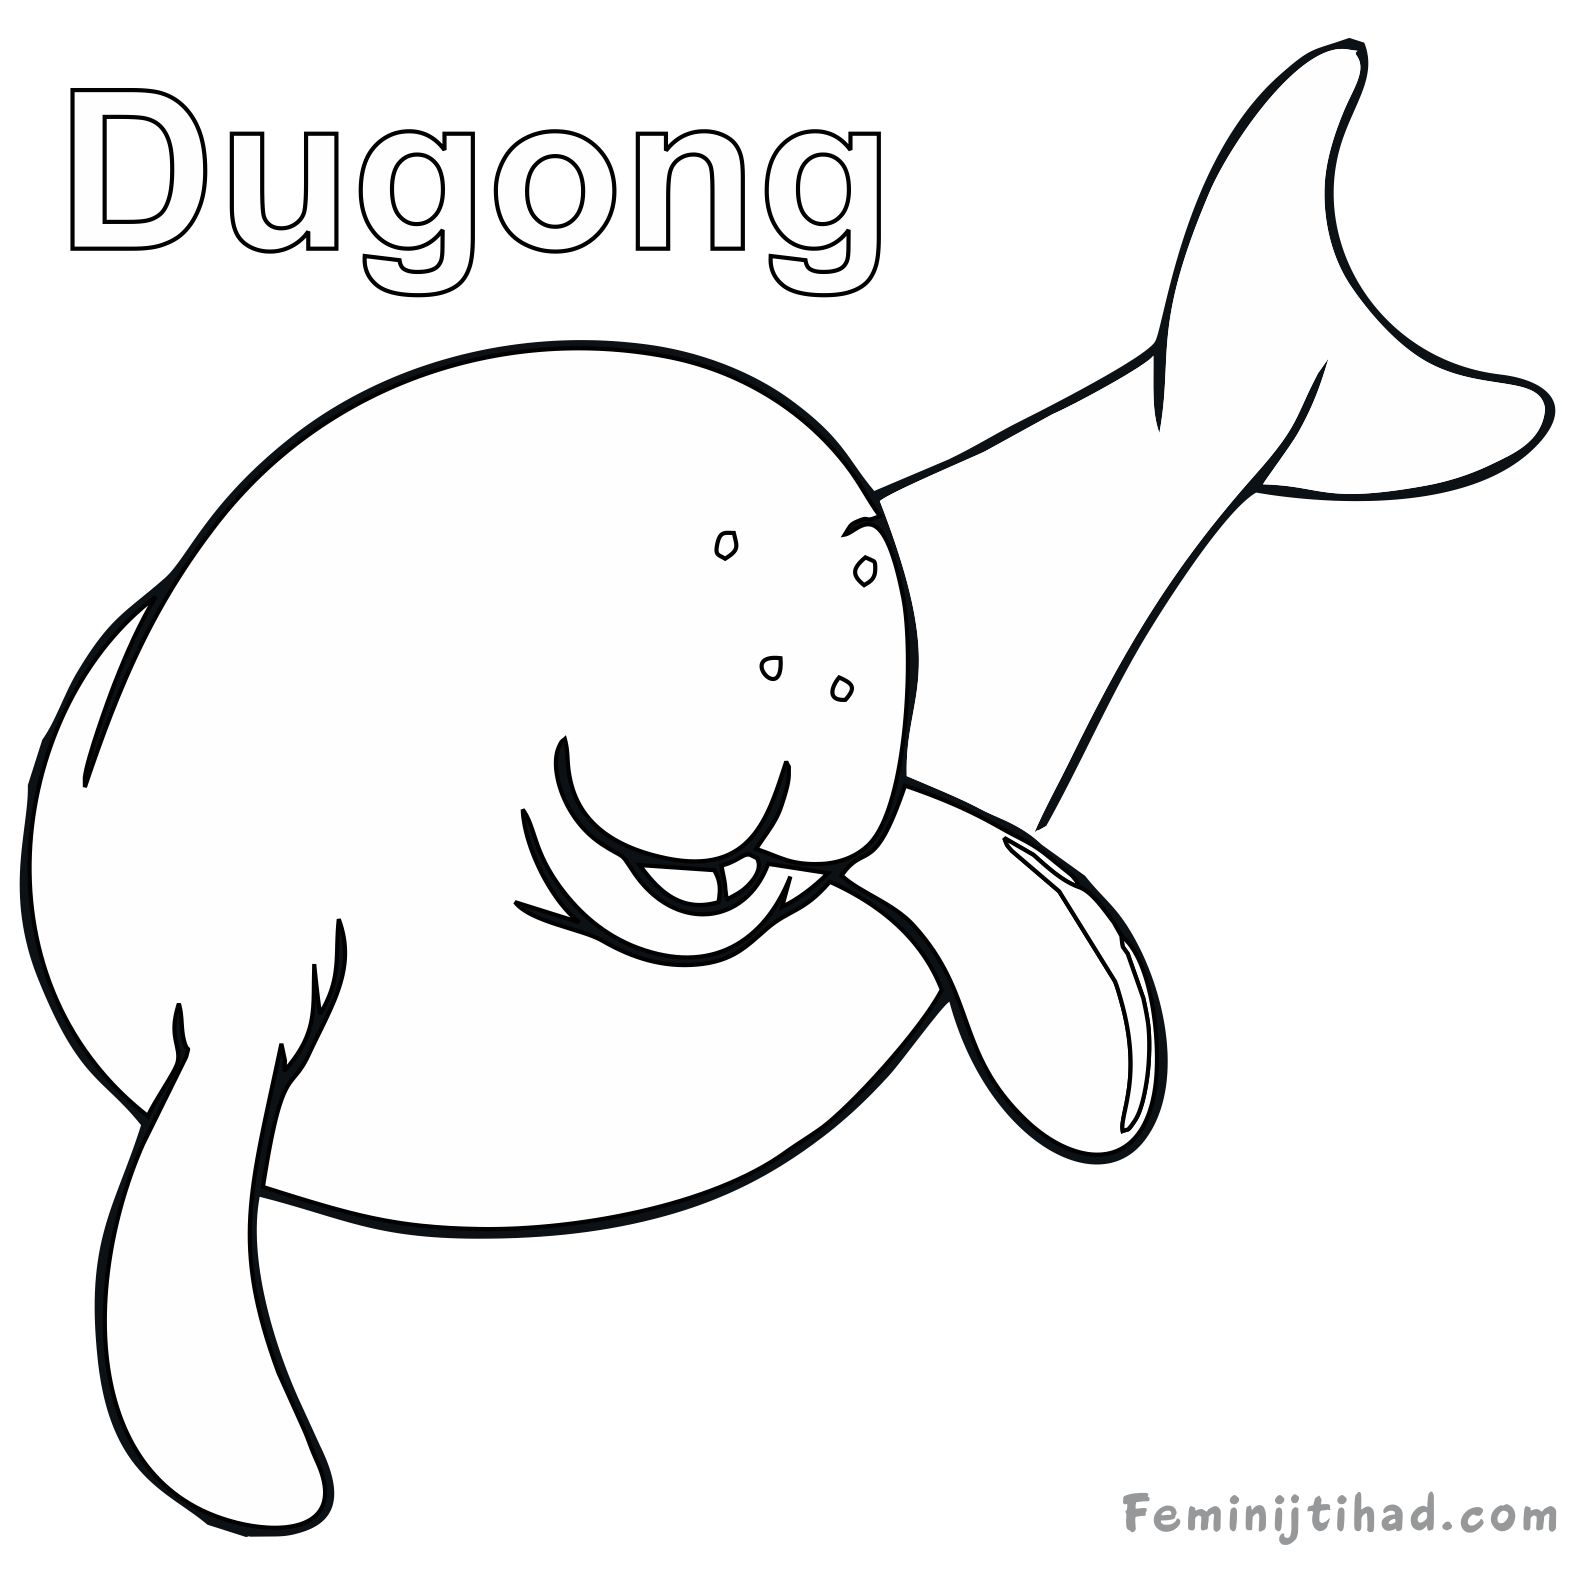 The best free Dugong coloring page images. Download from 13 free ...